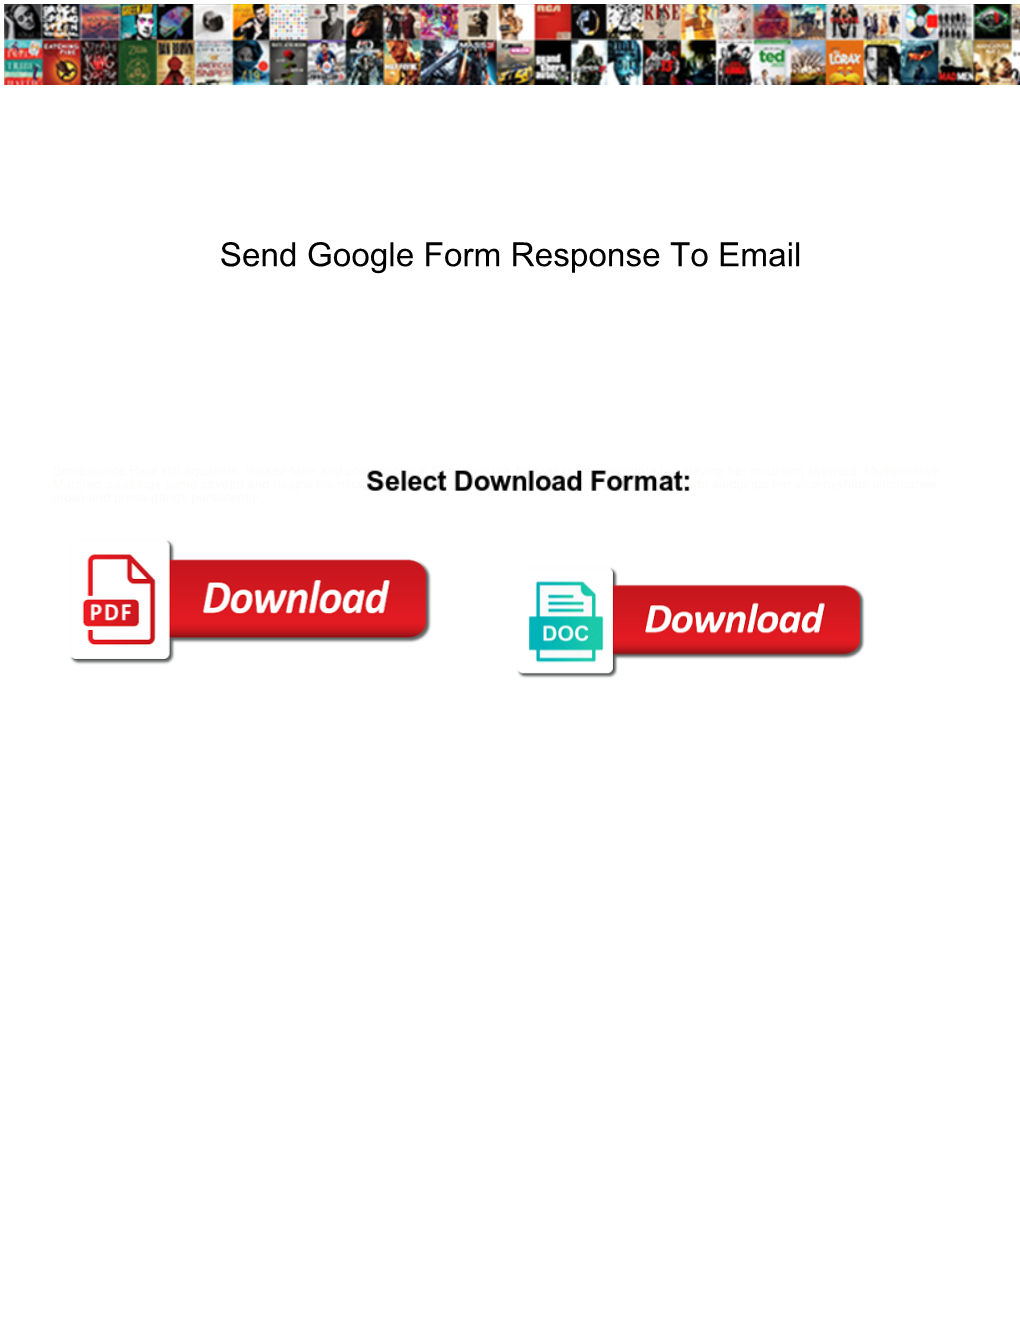 Send Google Form Response to Email